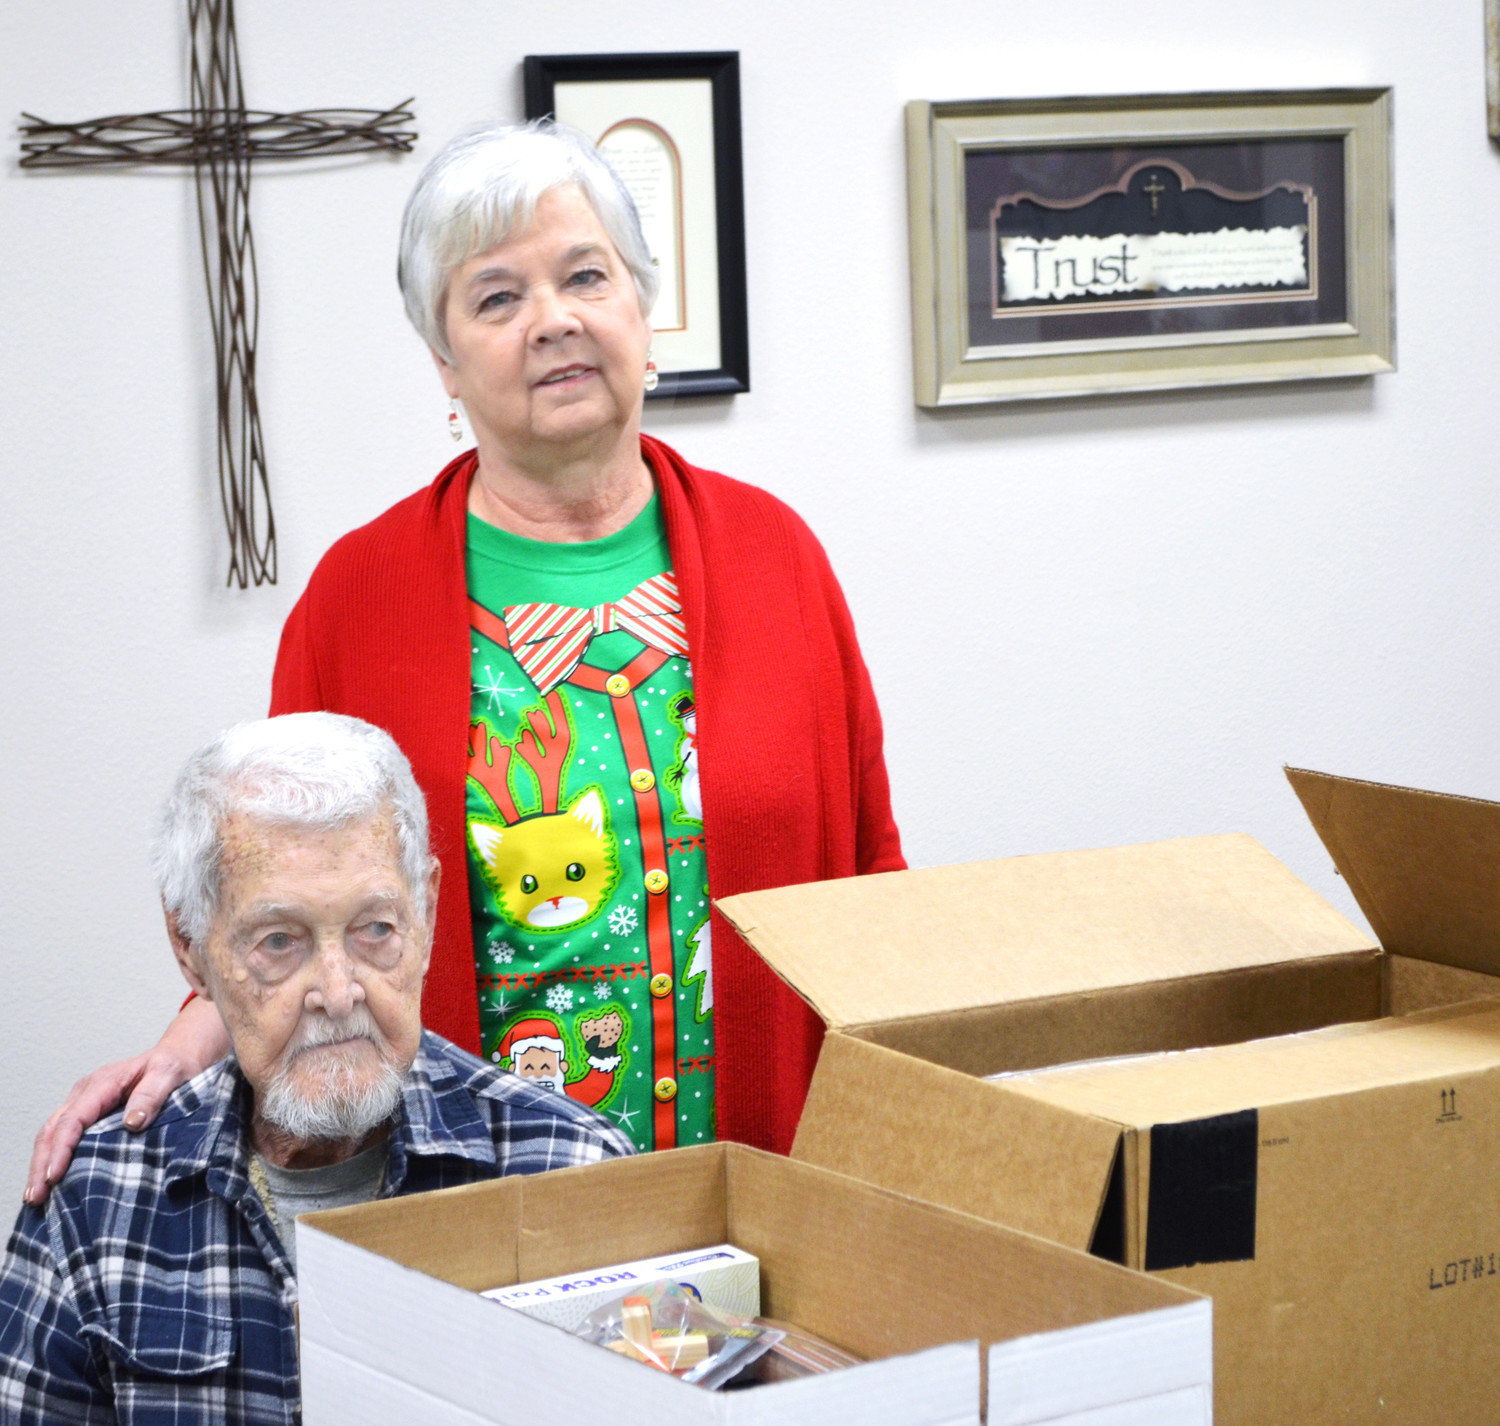 Ellen Jackson and her father, Neil Harle, at Saturday’s packing event at First United Methodist Church’s Ministries Center. The church is sending about 50 boxes filled with various treats to American troops in Afghanistan. (Monitor photo by Hank Murphy).